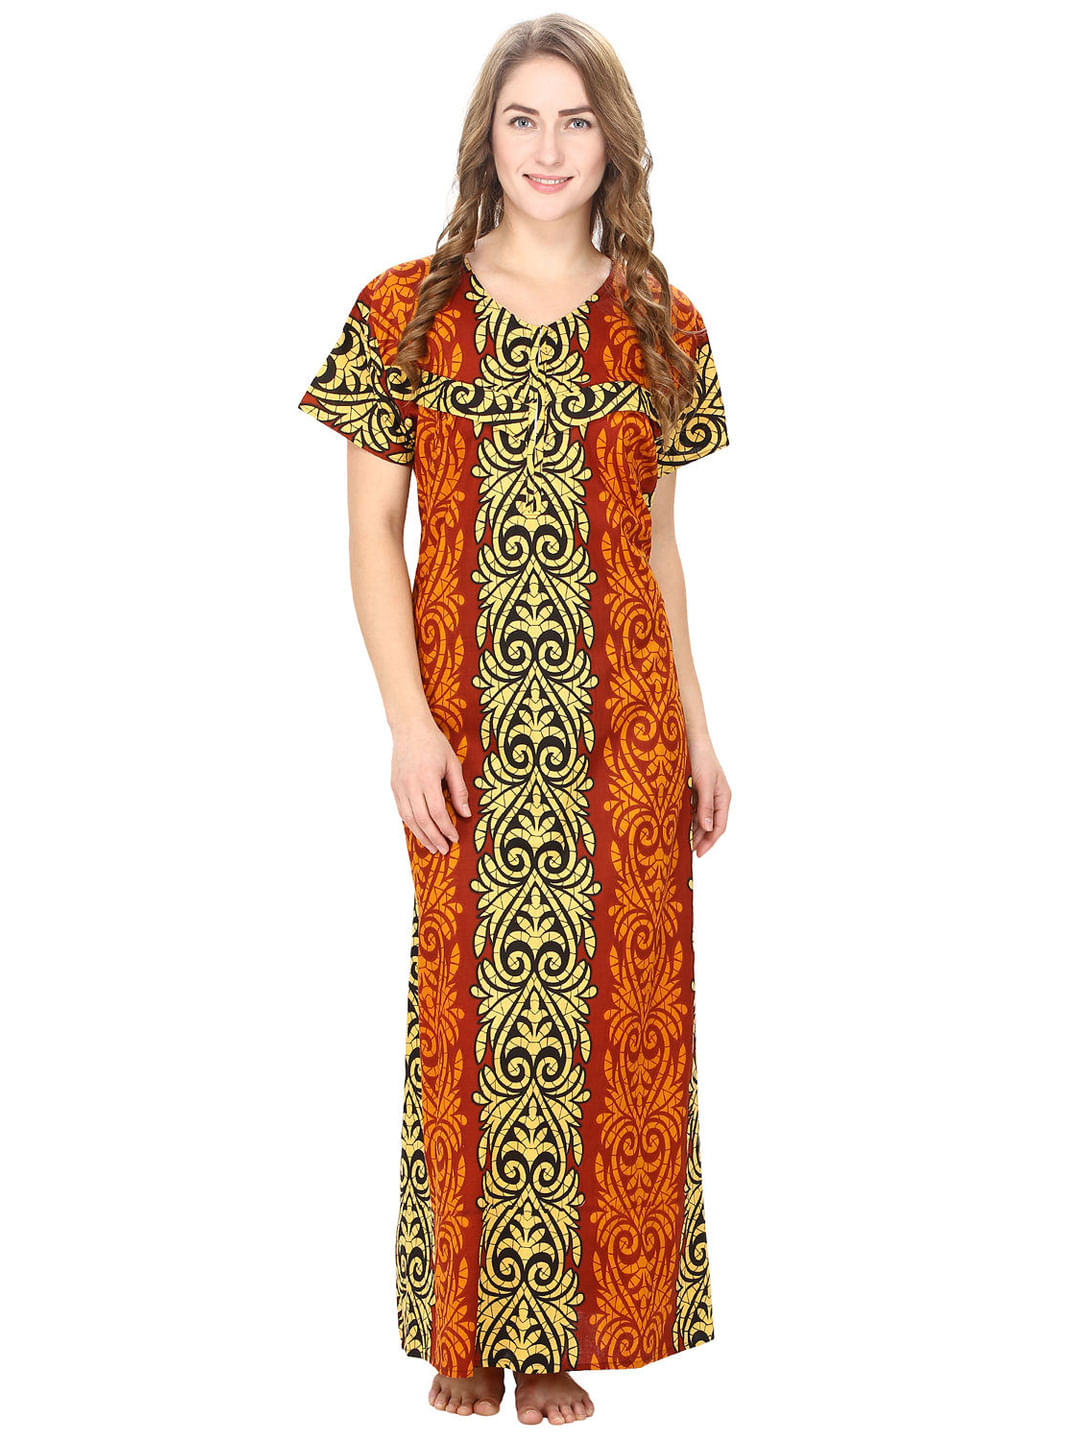 Cotton Yellow & Rust Brown Printed Maternity Nighty (Free Size)